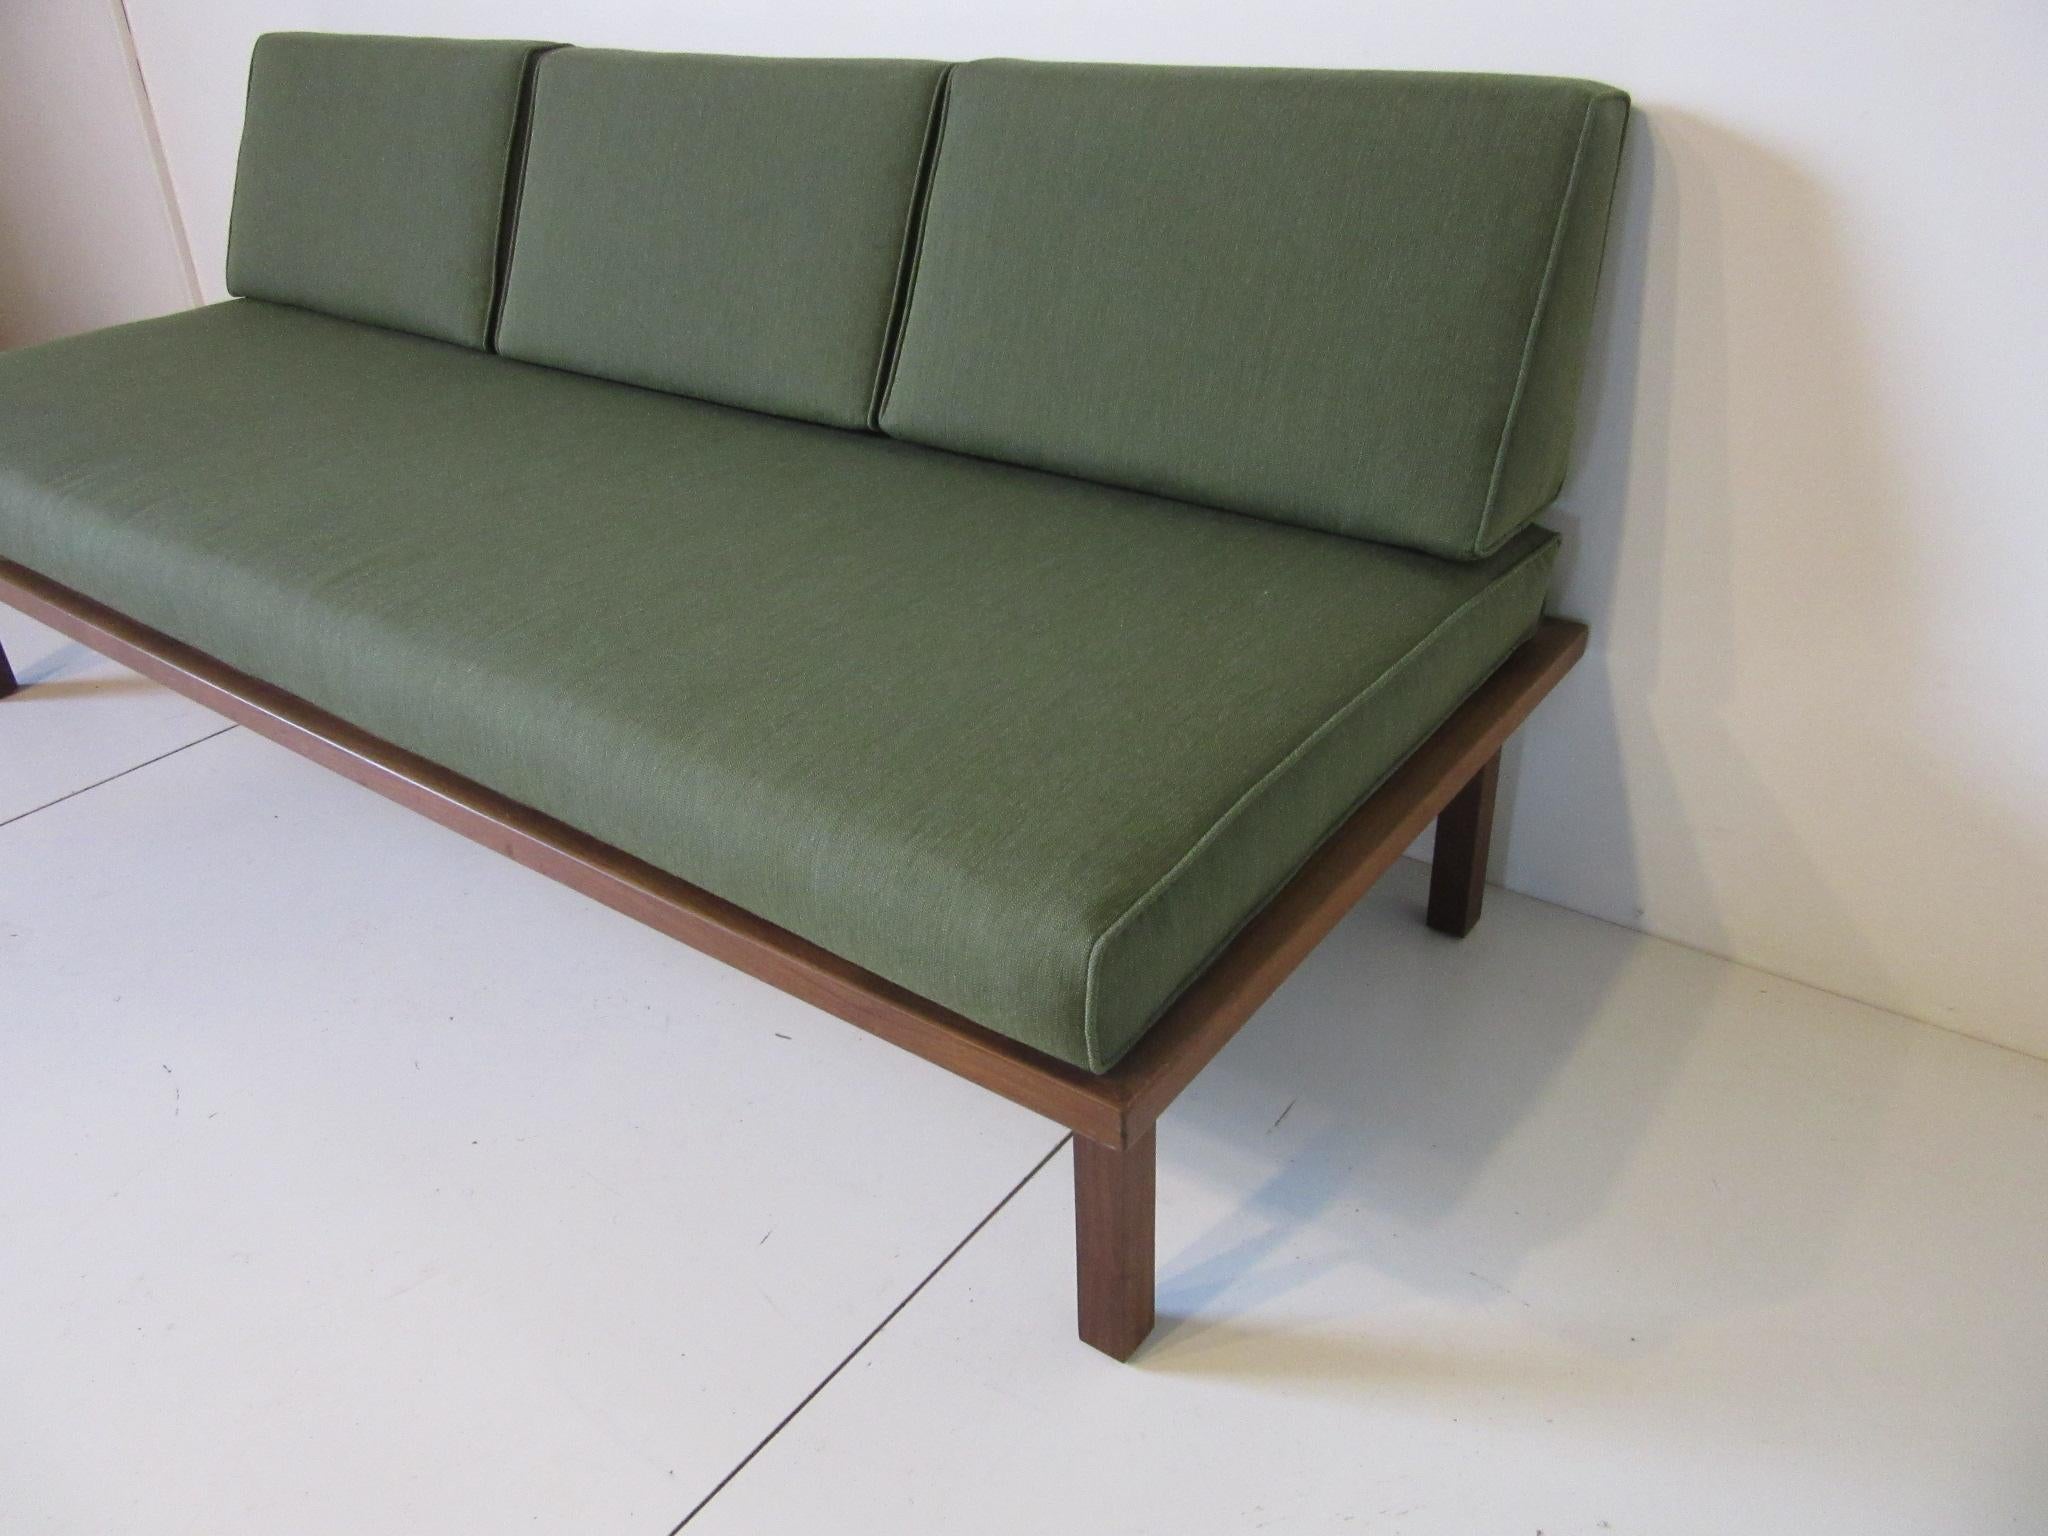 A Danish styled daybed or sofa with upholstered bottom and three loose back cushions in a green blended fabric. With no back rail this is perfect for that smaller living space or that spare room for a guest, also having folding legs that lock so it